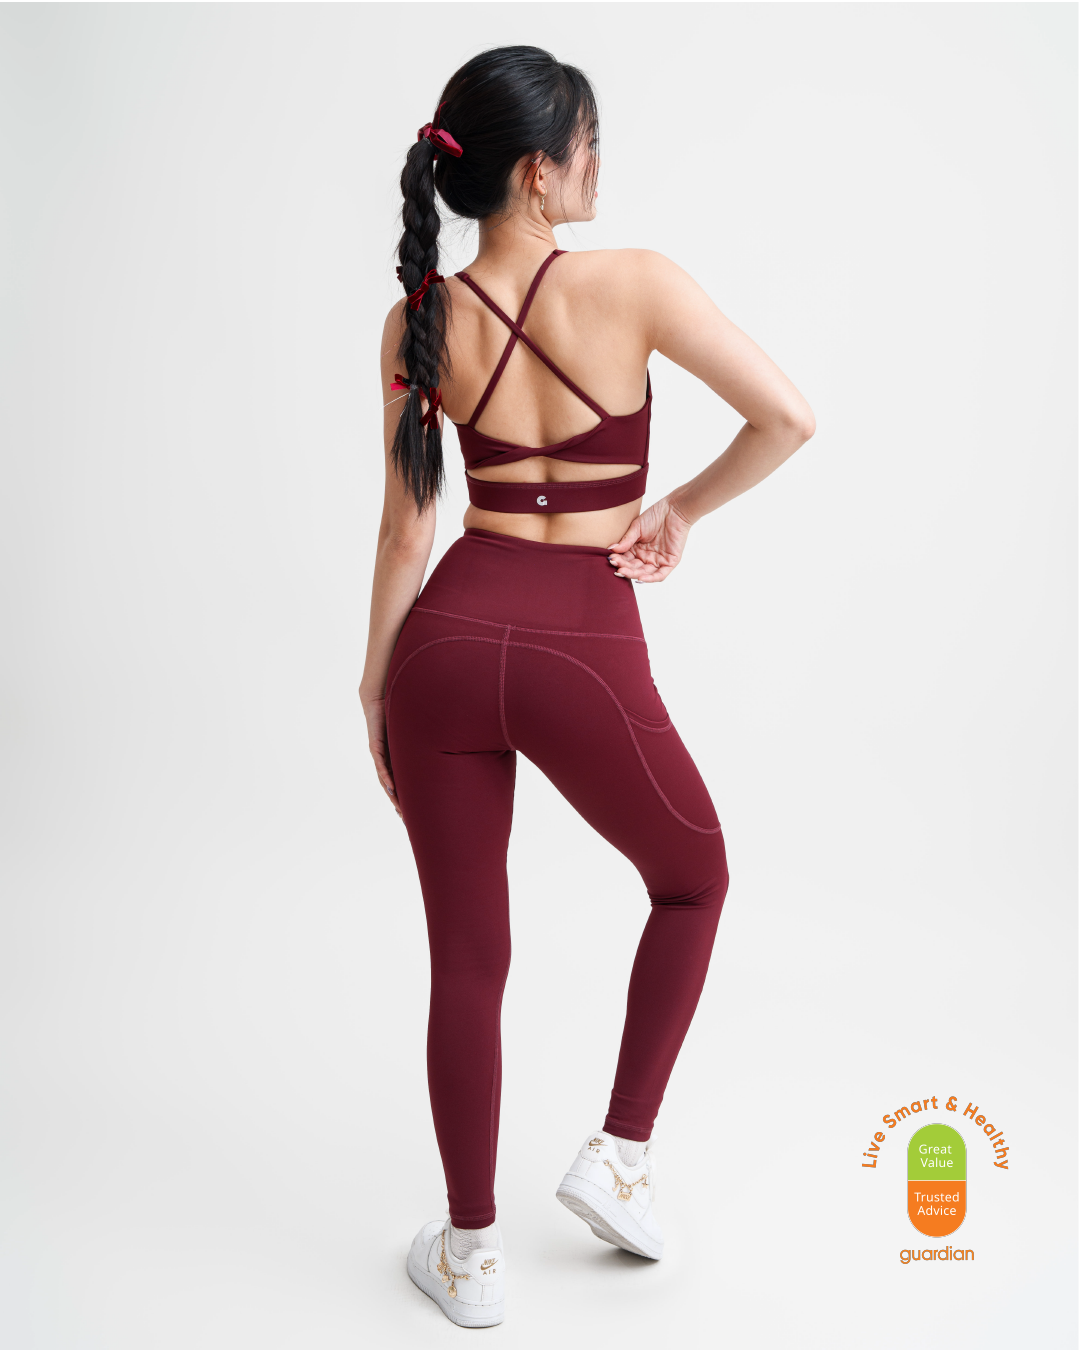 Velocity II Leggings in Burgundy (IMPROVED VERSION) – GYM SQUAD ACTIVE